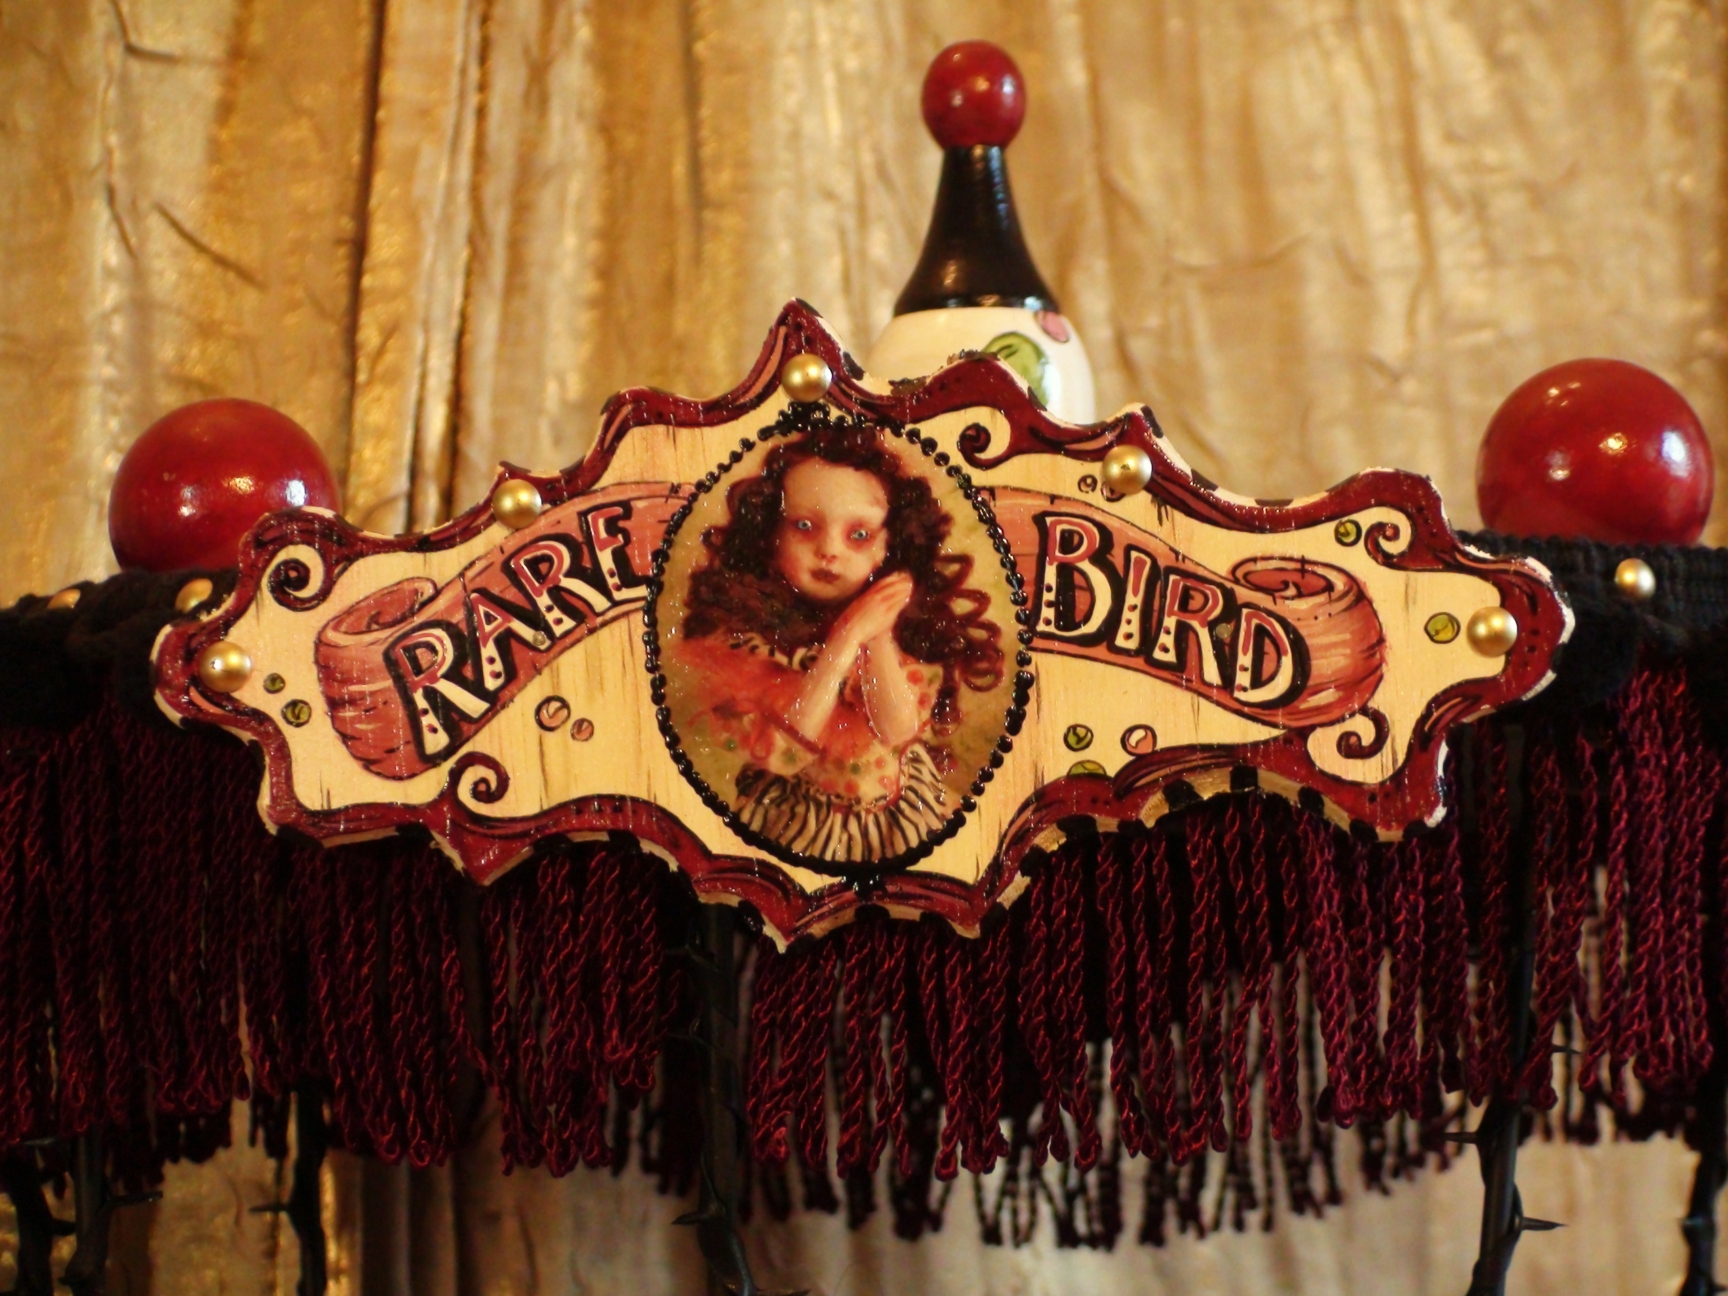 close-up of hand painted circus sideshow sign